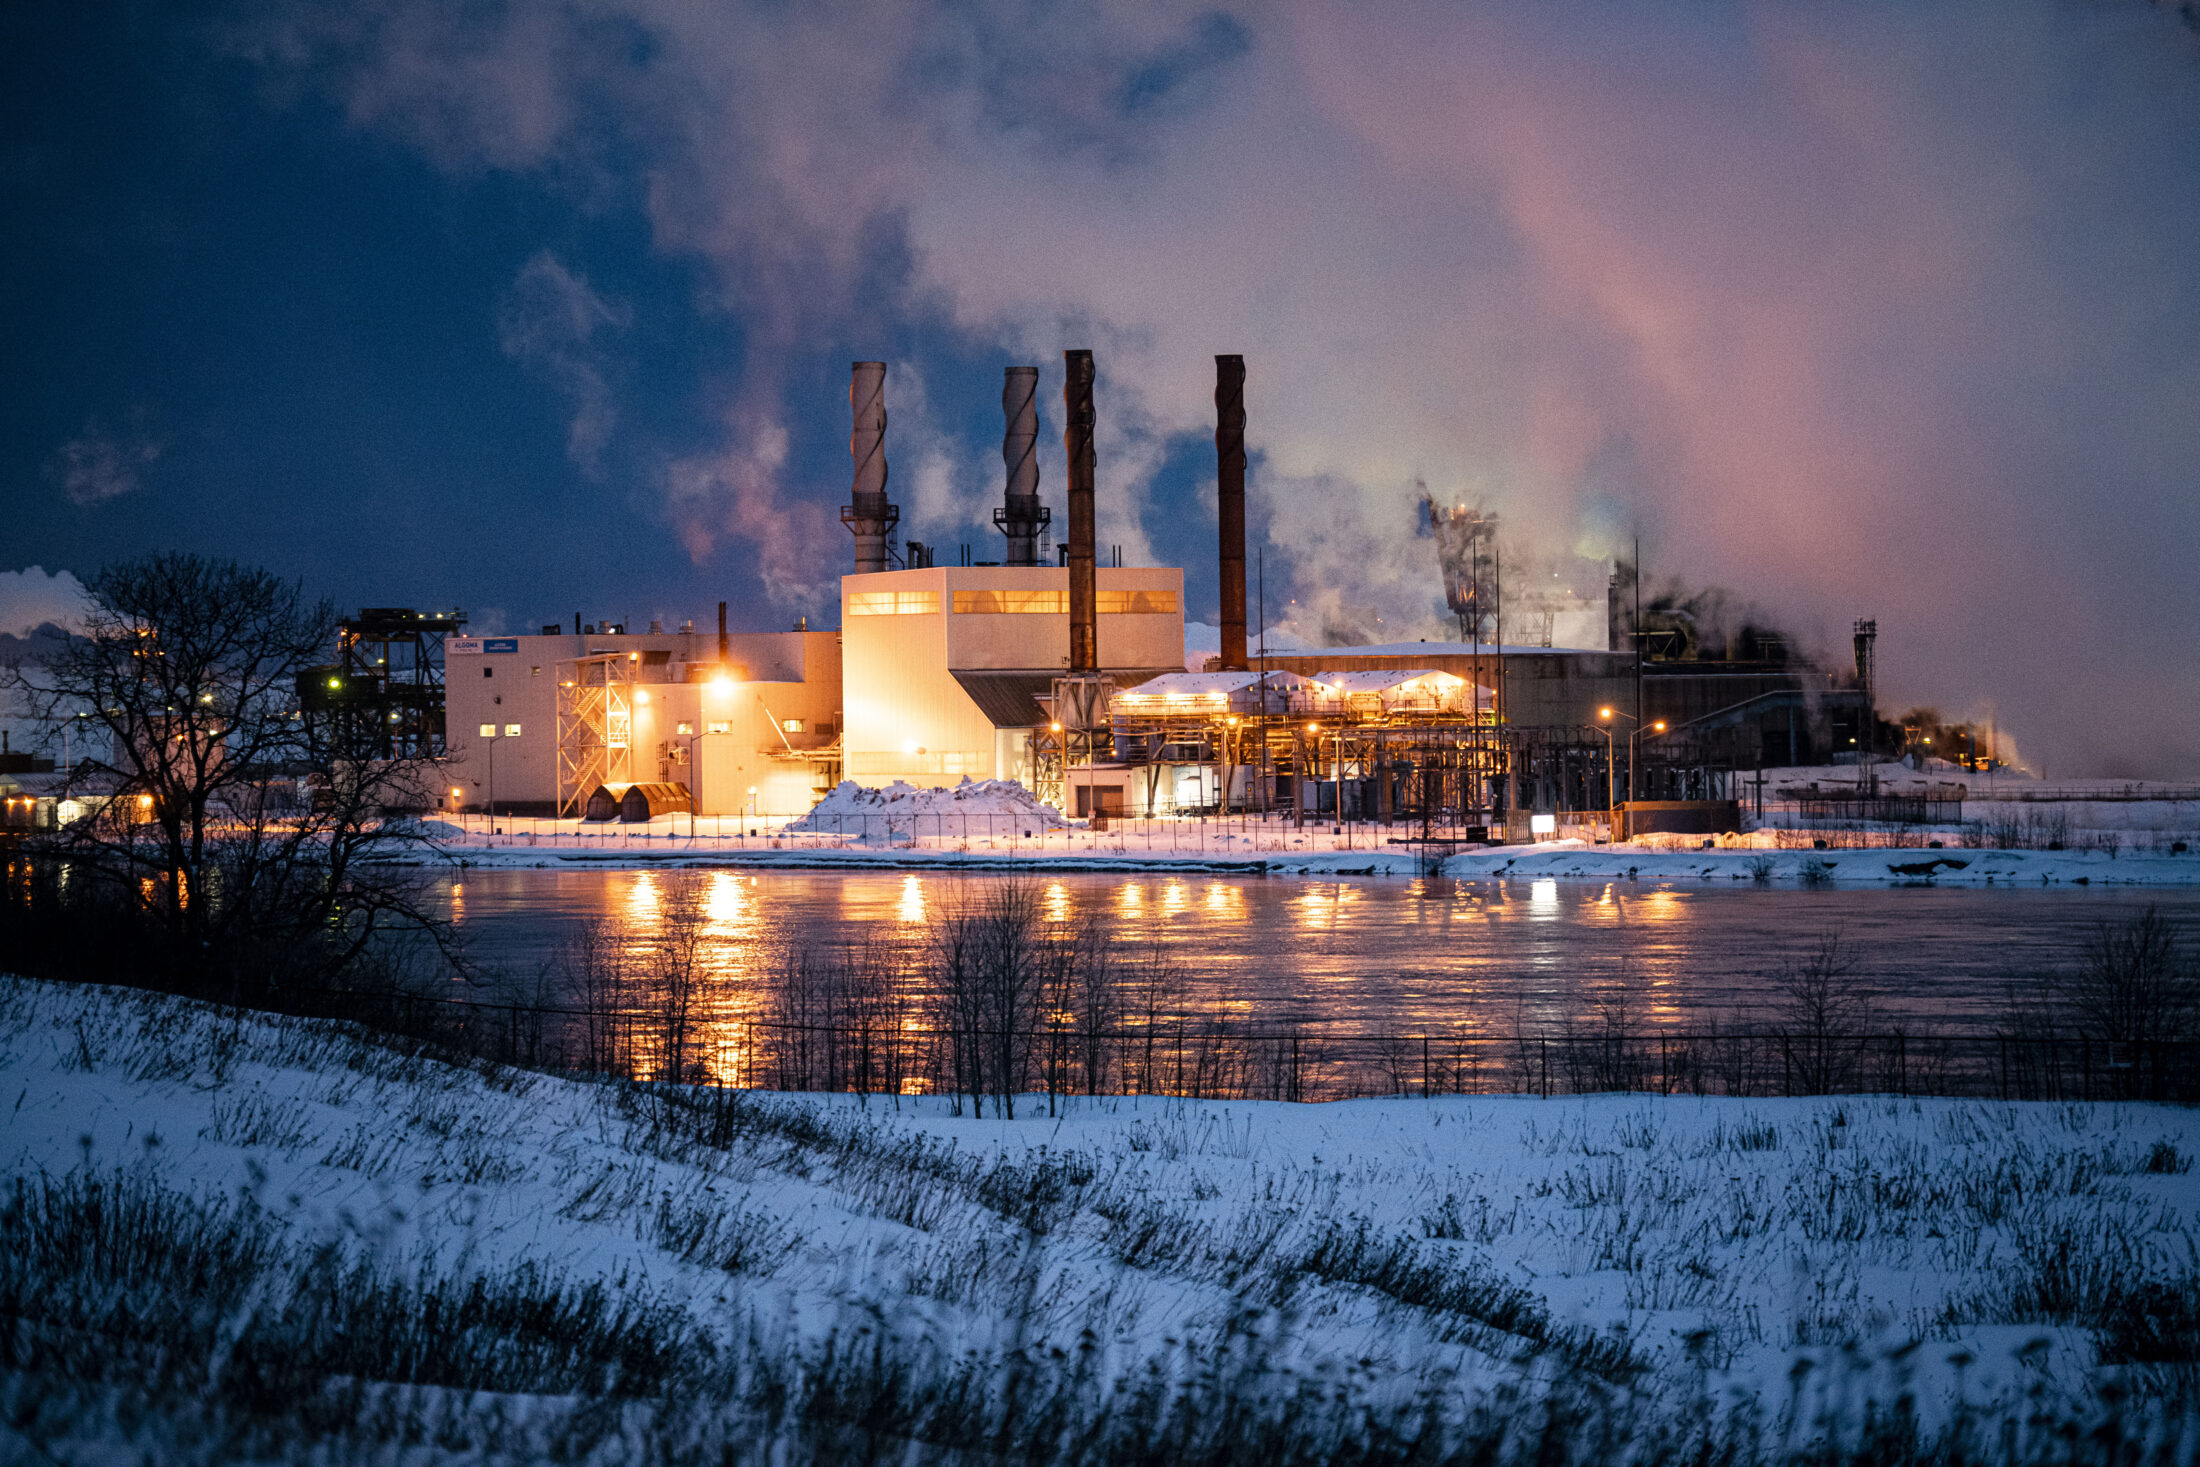 Steam rises from the Algoma Steel plant in Sault Ste. Marie, Ont., seen at night from across a river as snow blankets the ground. 